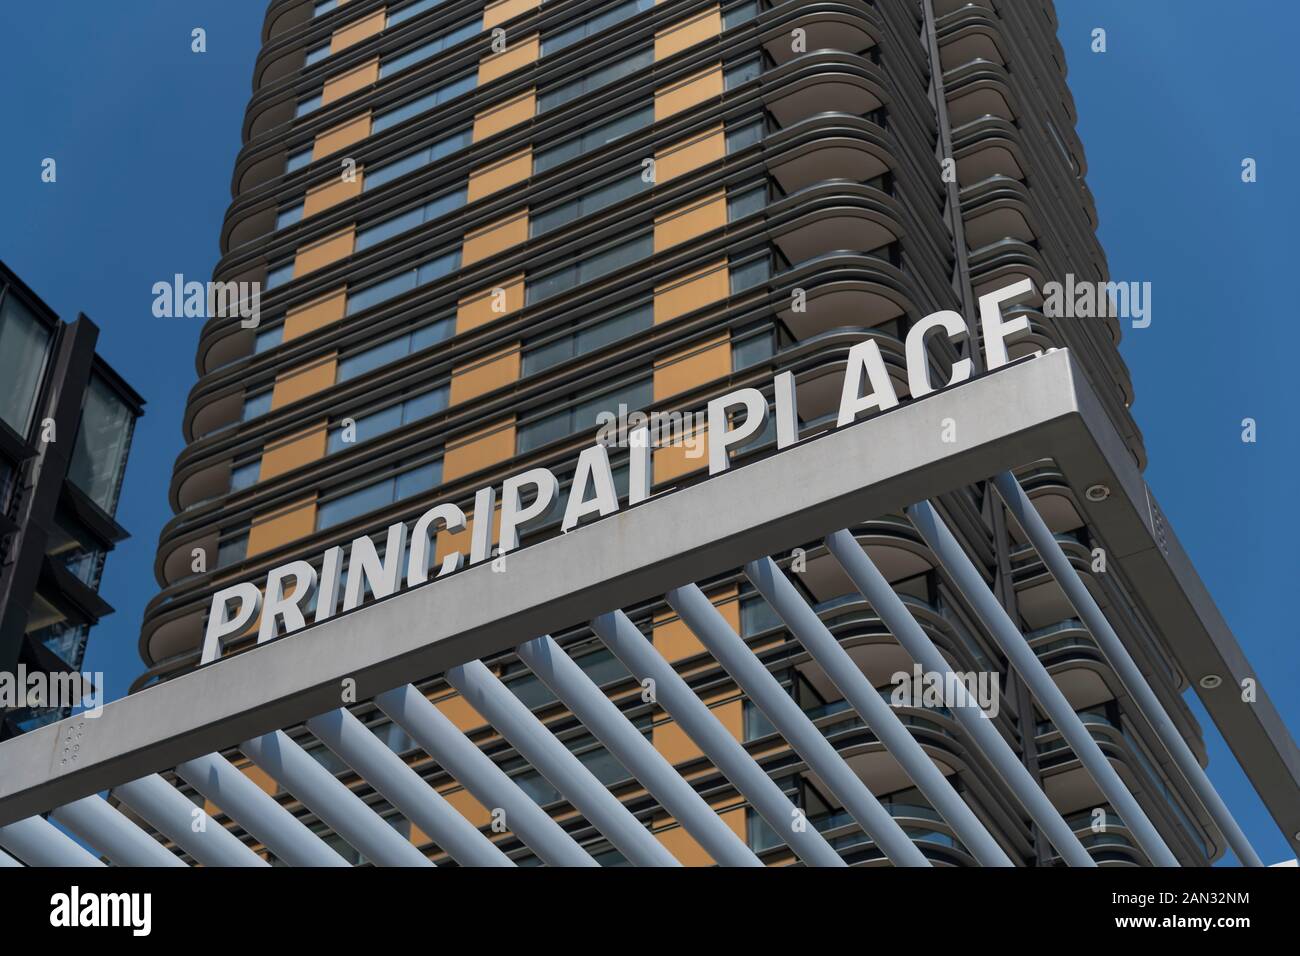 Principal Tower and sign for Principal Place Stock Photo